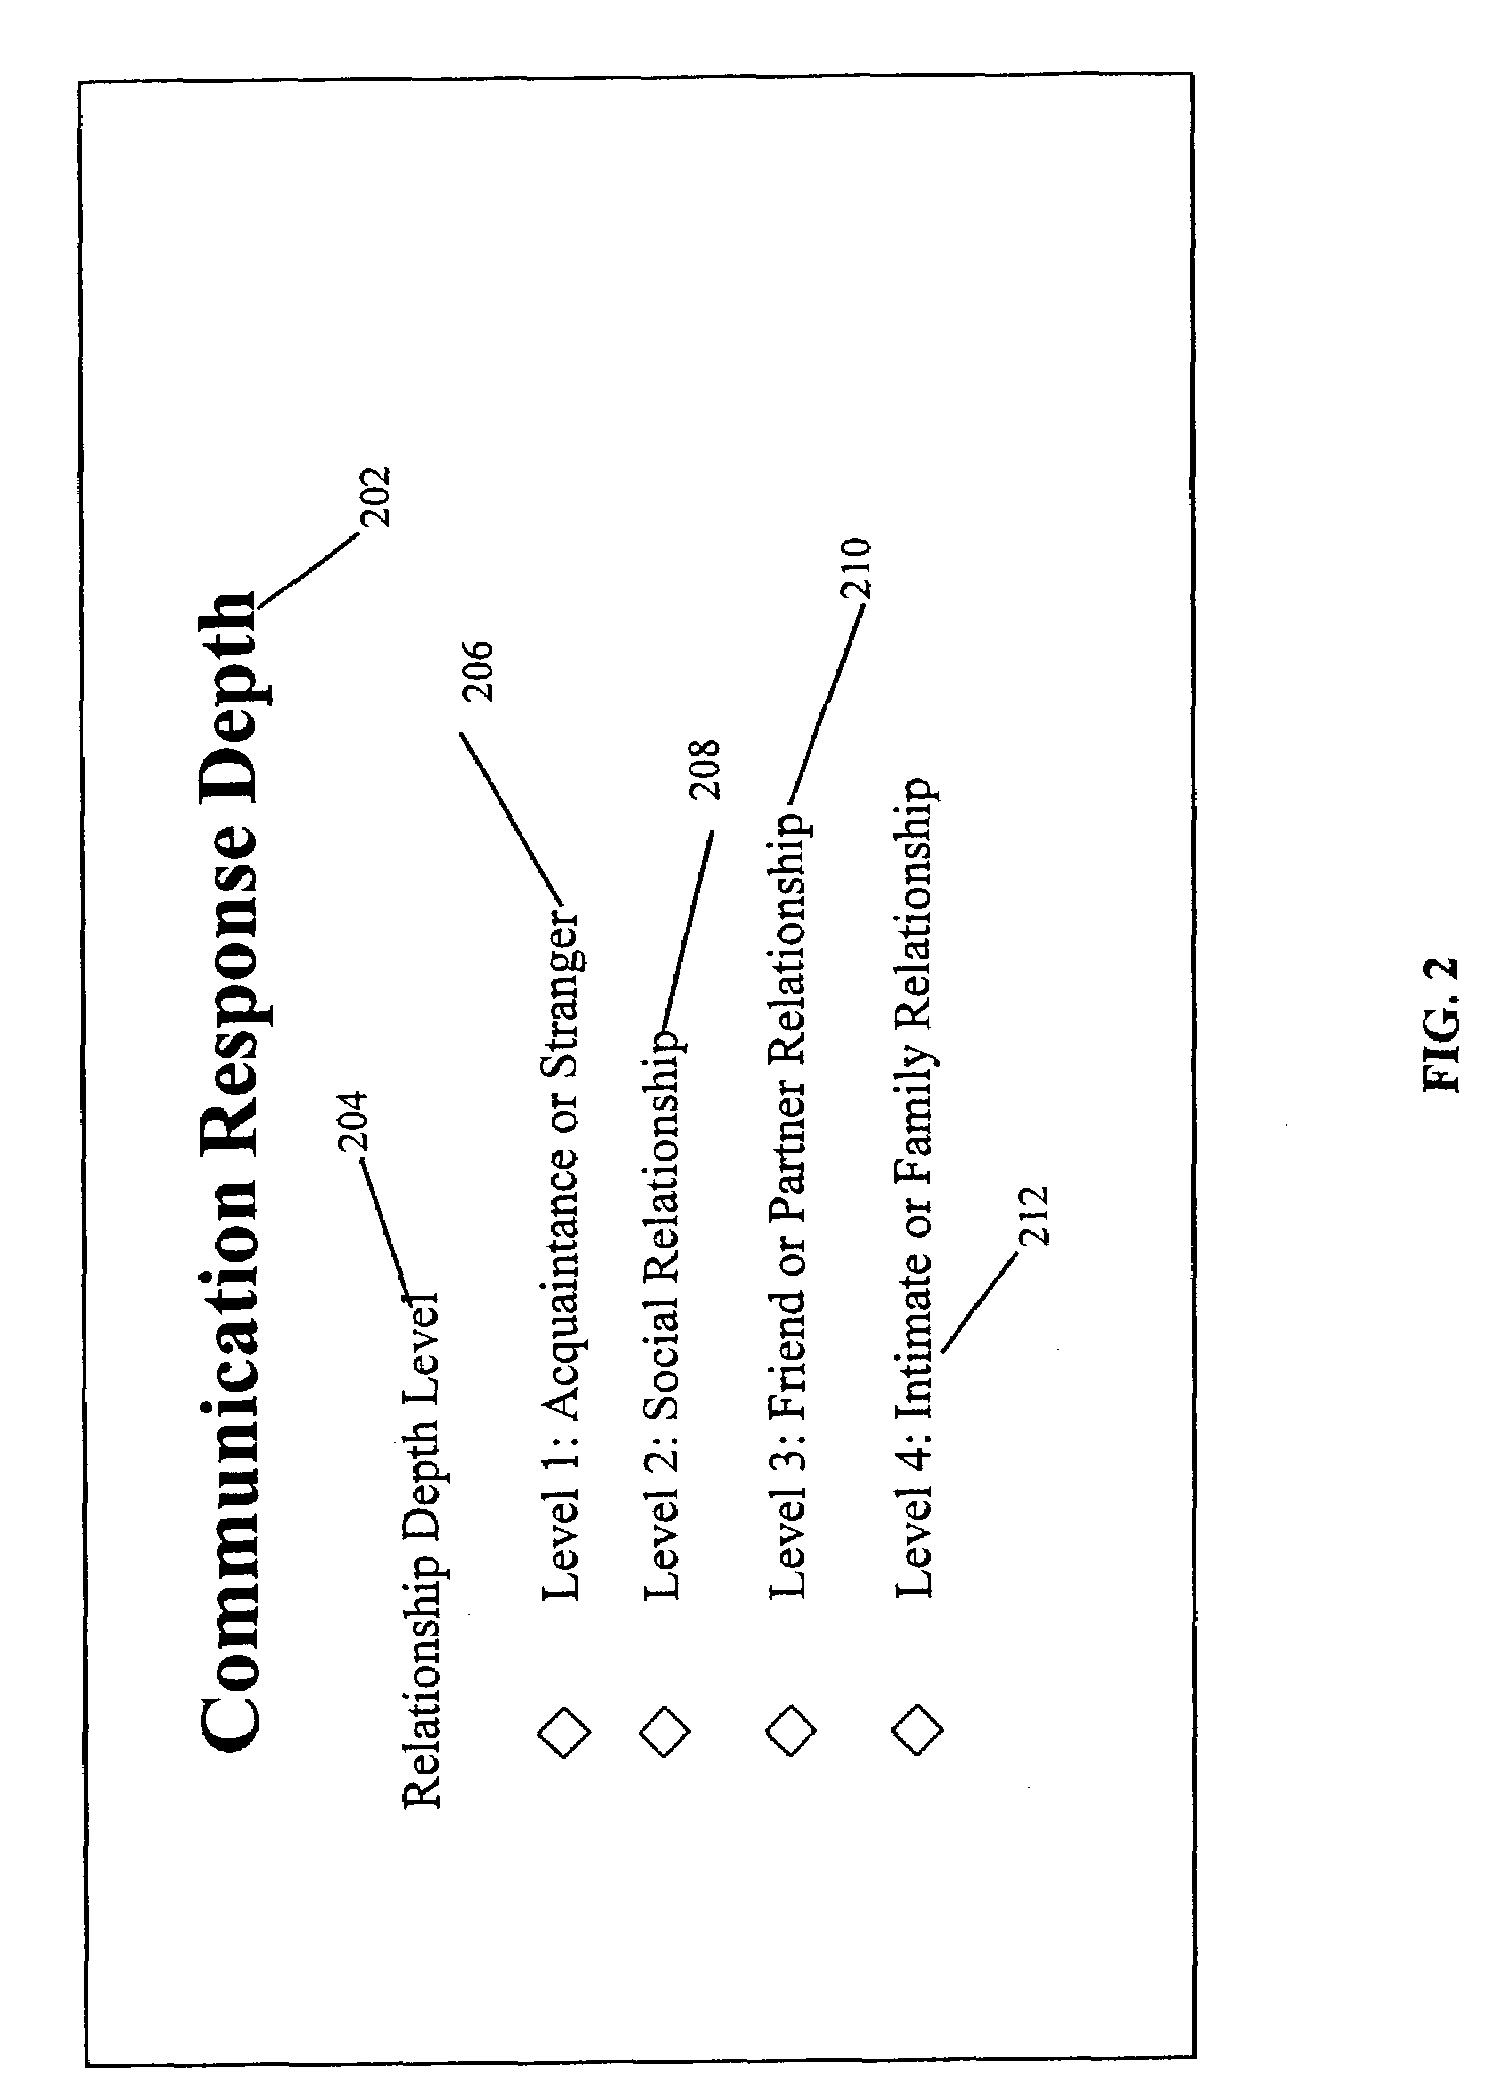 System and method for creating custom specific text and emotive content message response templates for textual communications